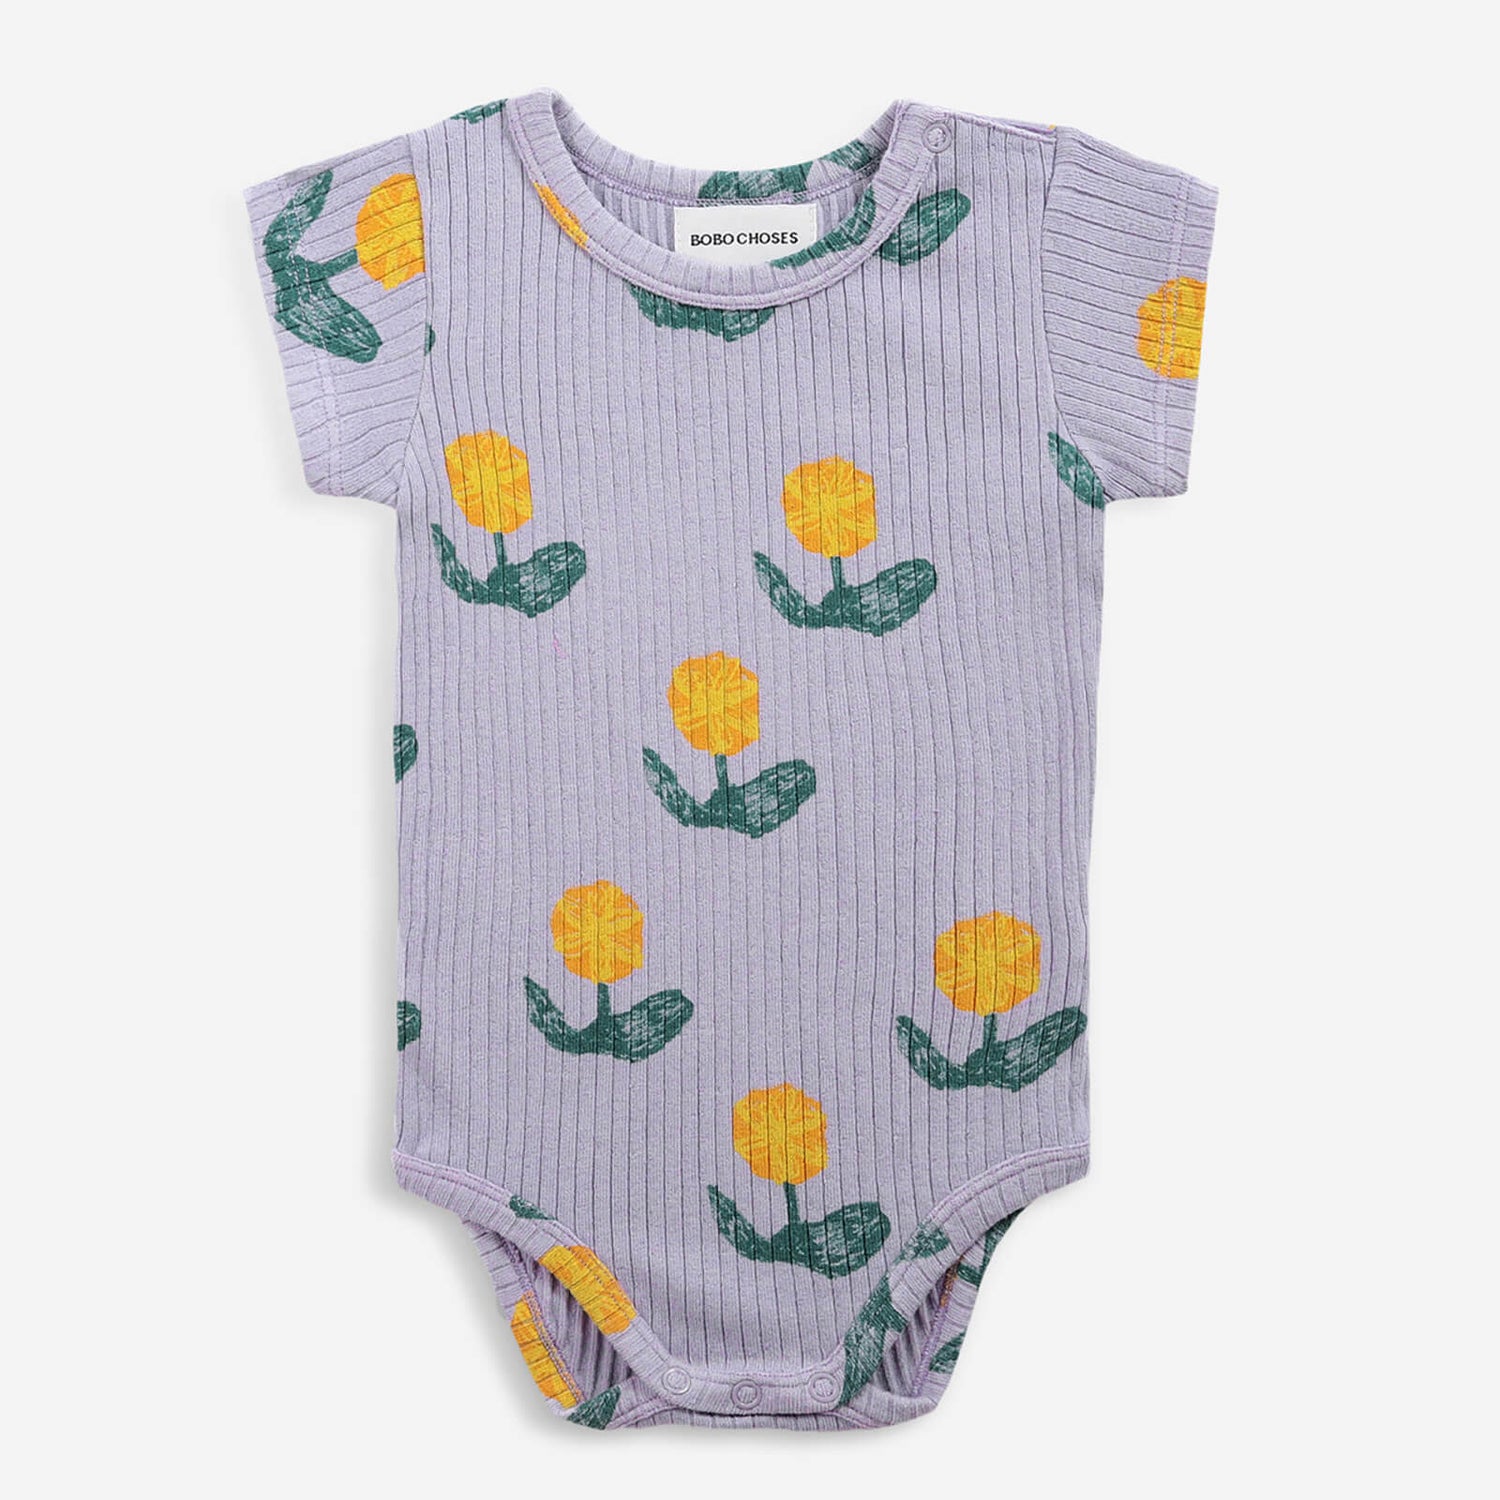 Bobo Choses Baby Wallflowers All Over Short Sleeve Body - 3-6 months